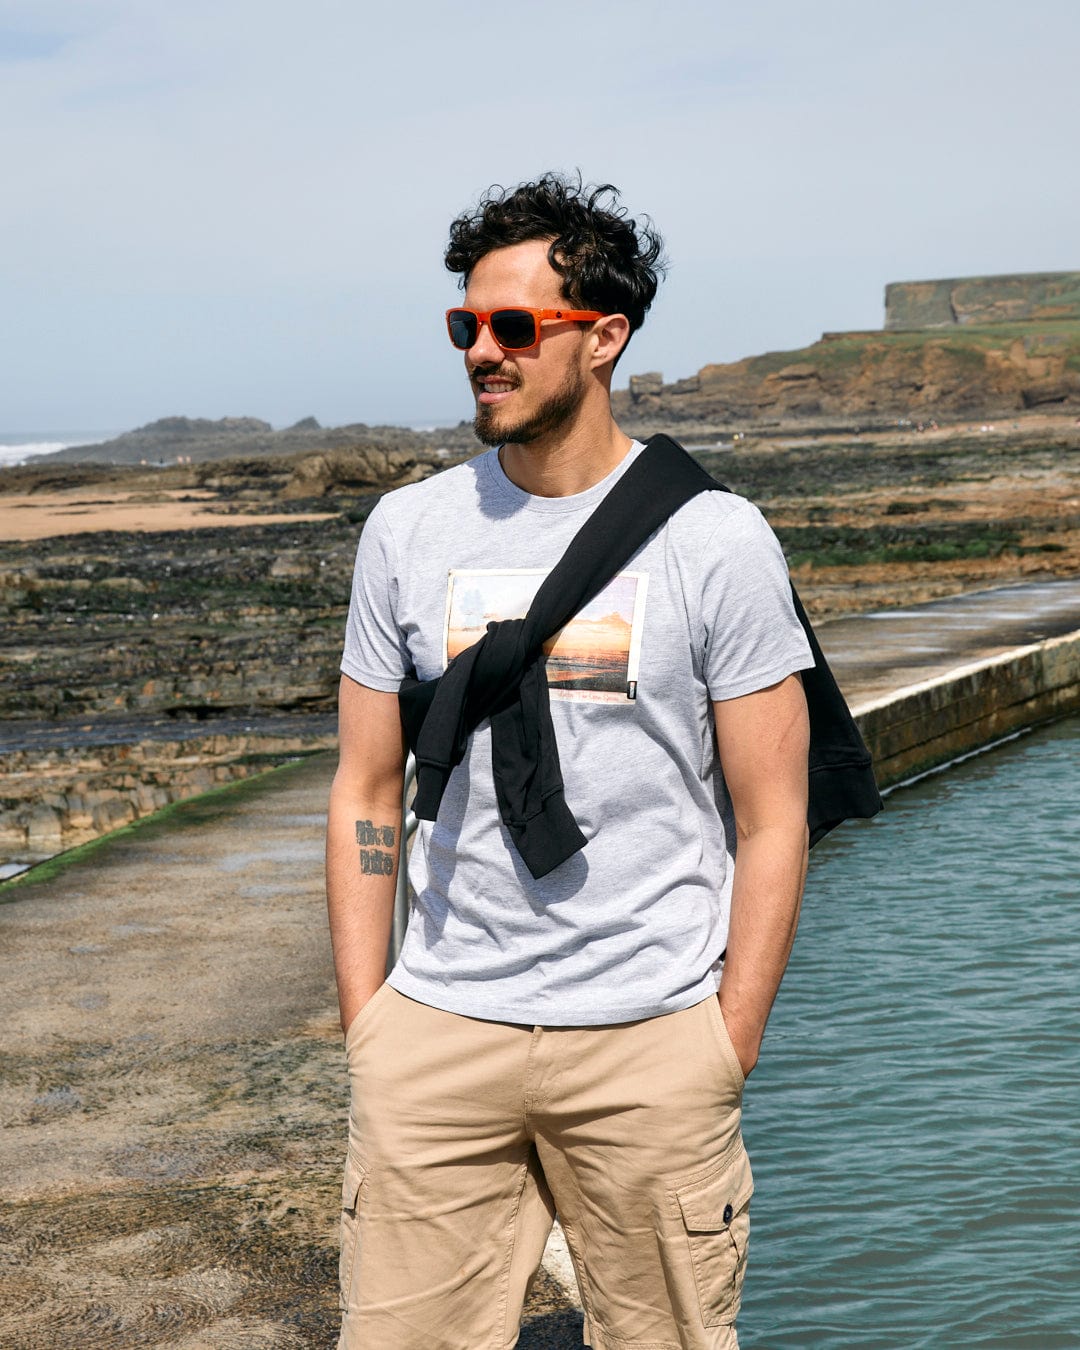 A man in sunglasses, wearing a Saltrock "Sun Sets" mens short sleeve t-shirt in grey marl with a crew neckline and khaki shorts, stands by a seaside with a rocky backdrop, smiling slightly.